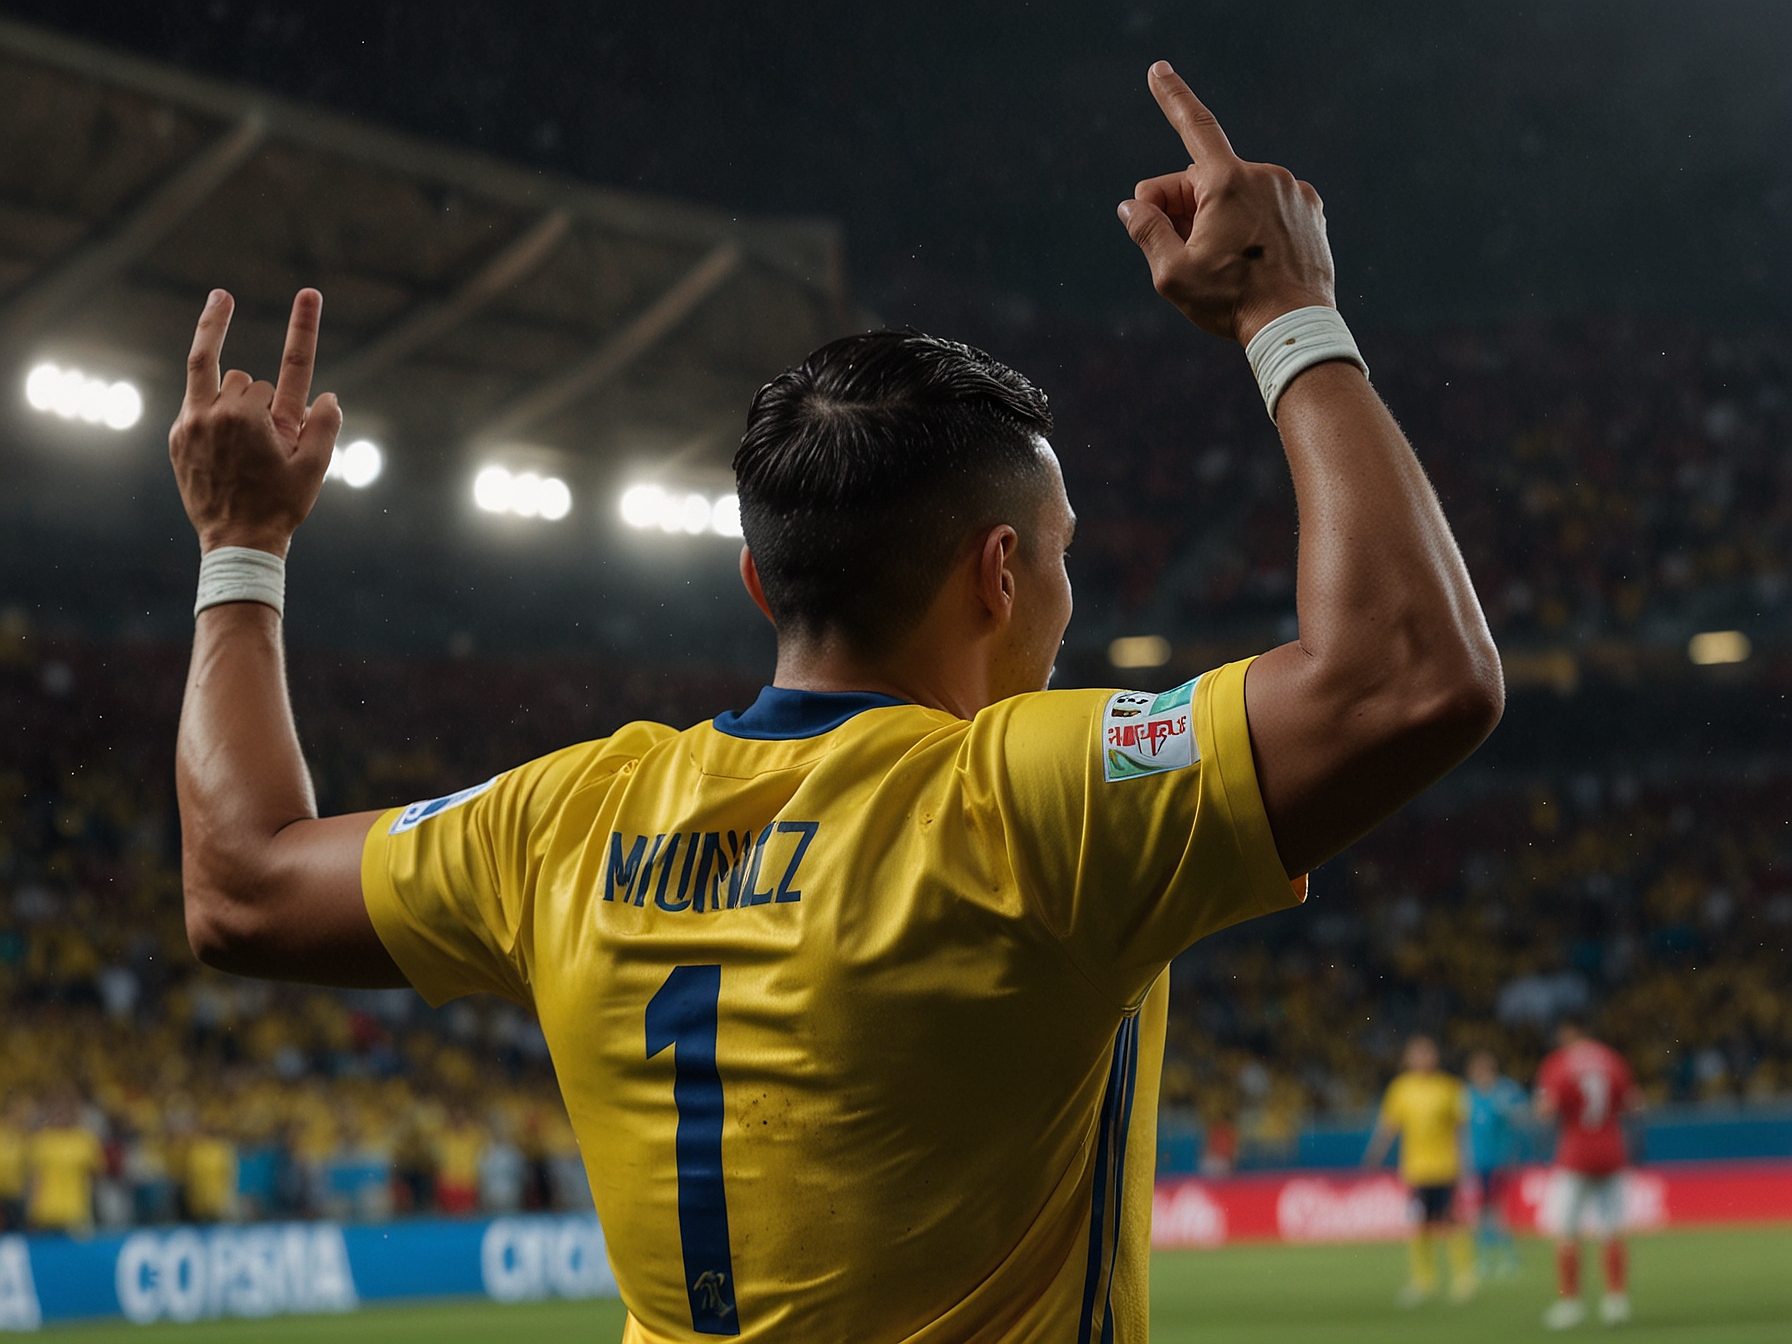 Daniel Muñoz celebrates after scoring the crucial goal for Colombia against Brazil in the Copa America match held in Santa Clara, showcasing his joy and determination.